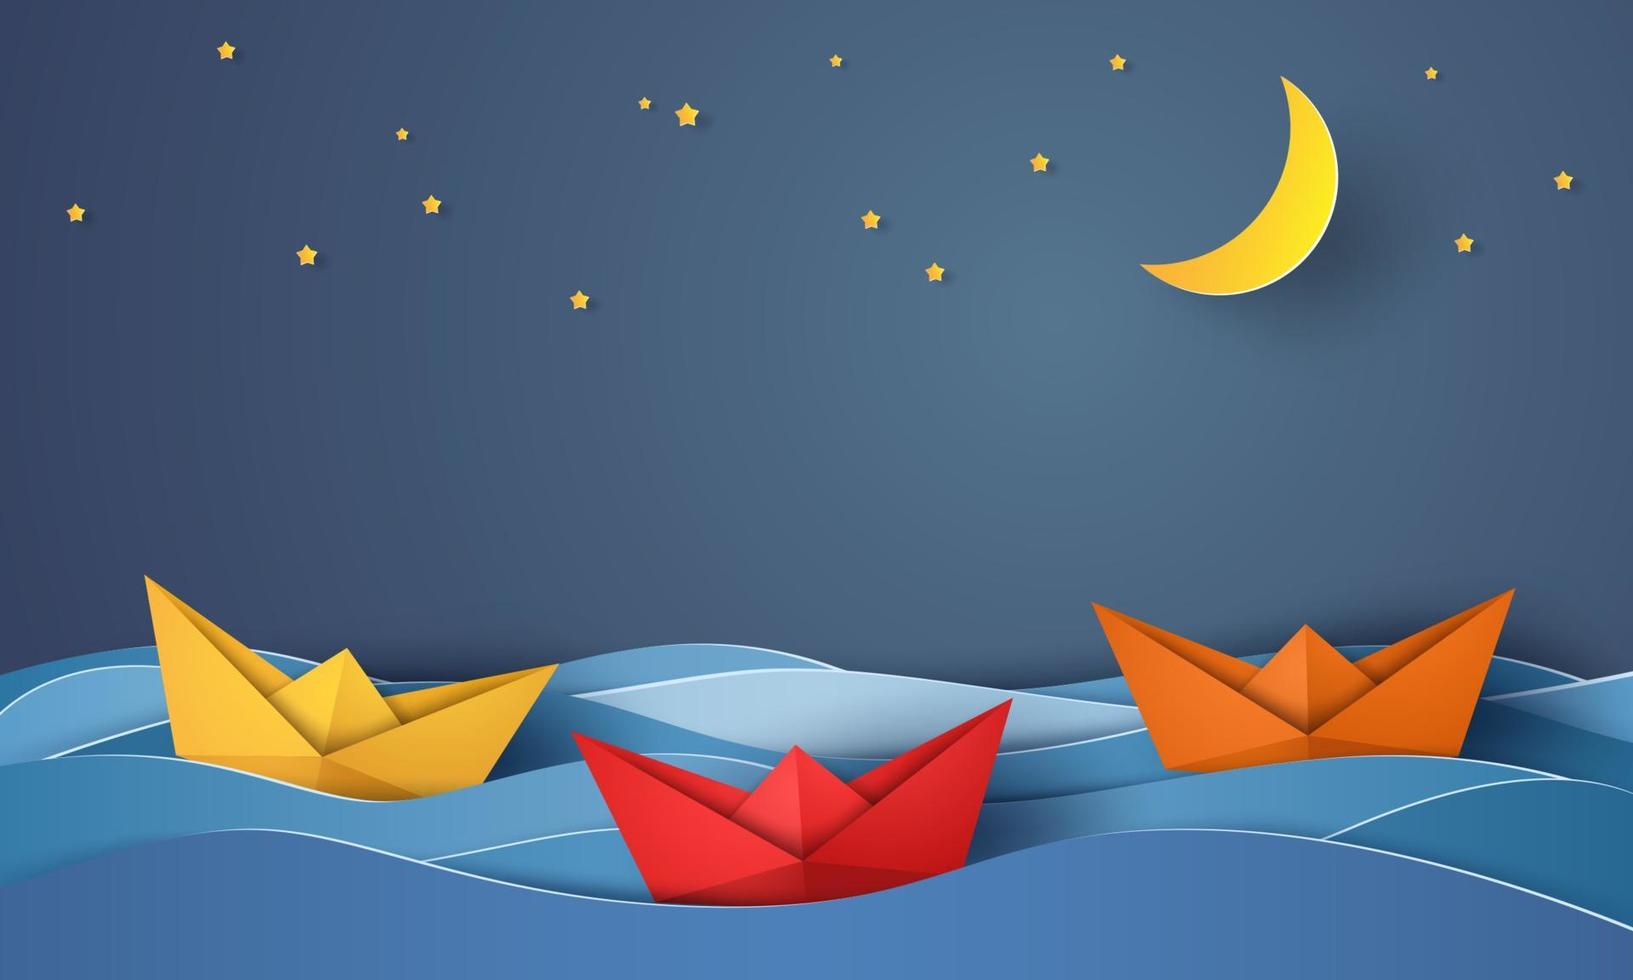 origami boat sailing in blue ocean at night, paper art style vector